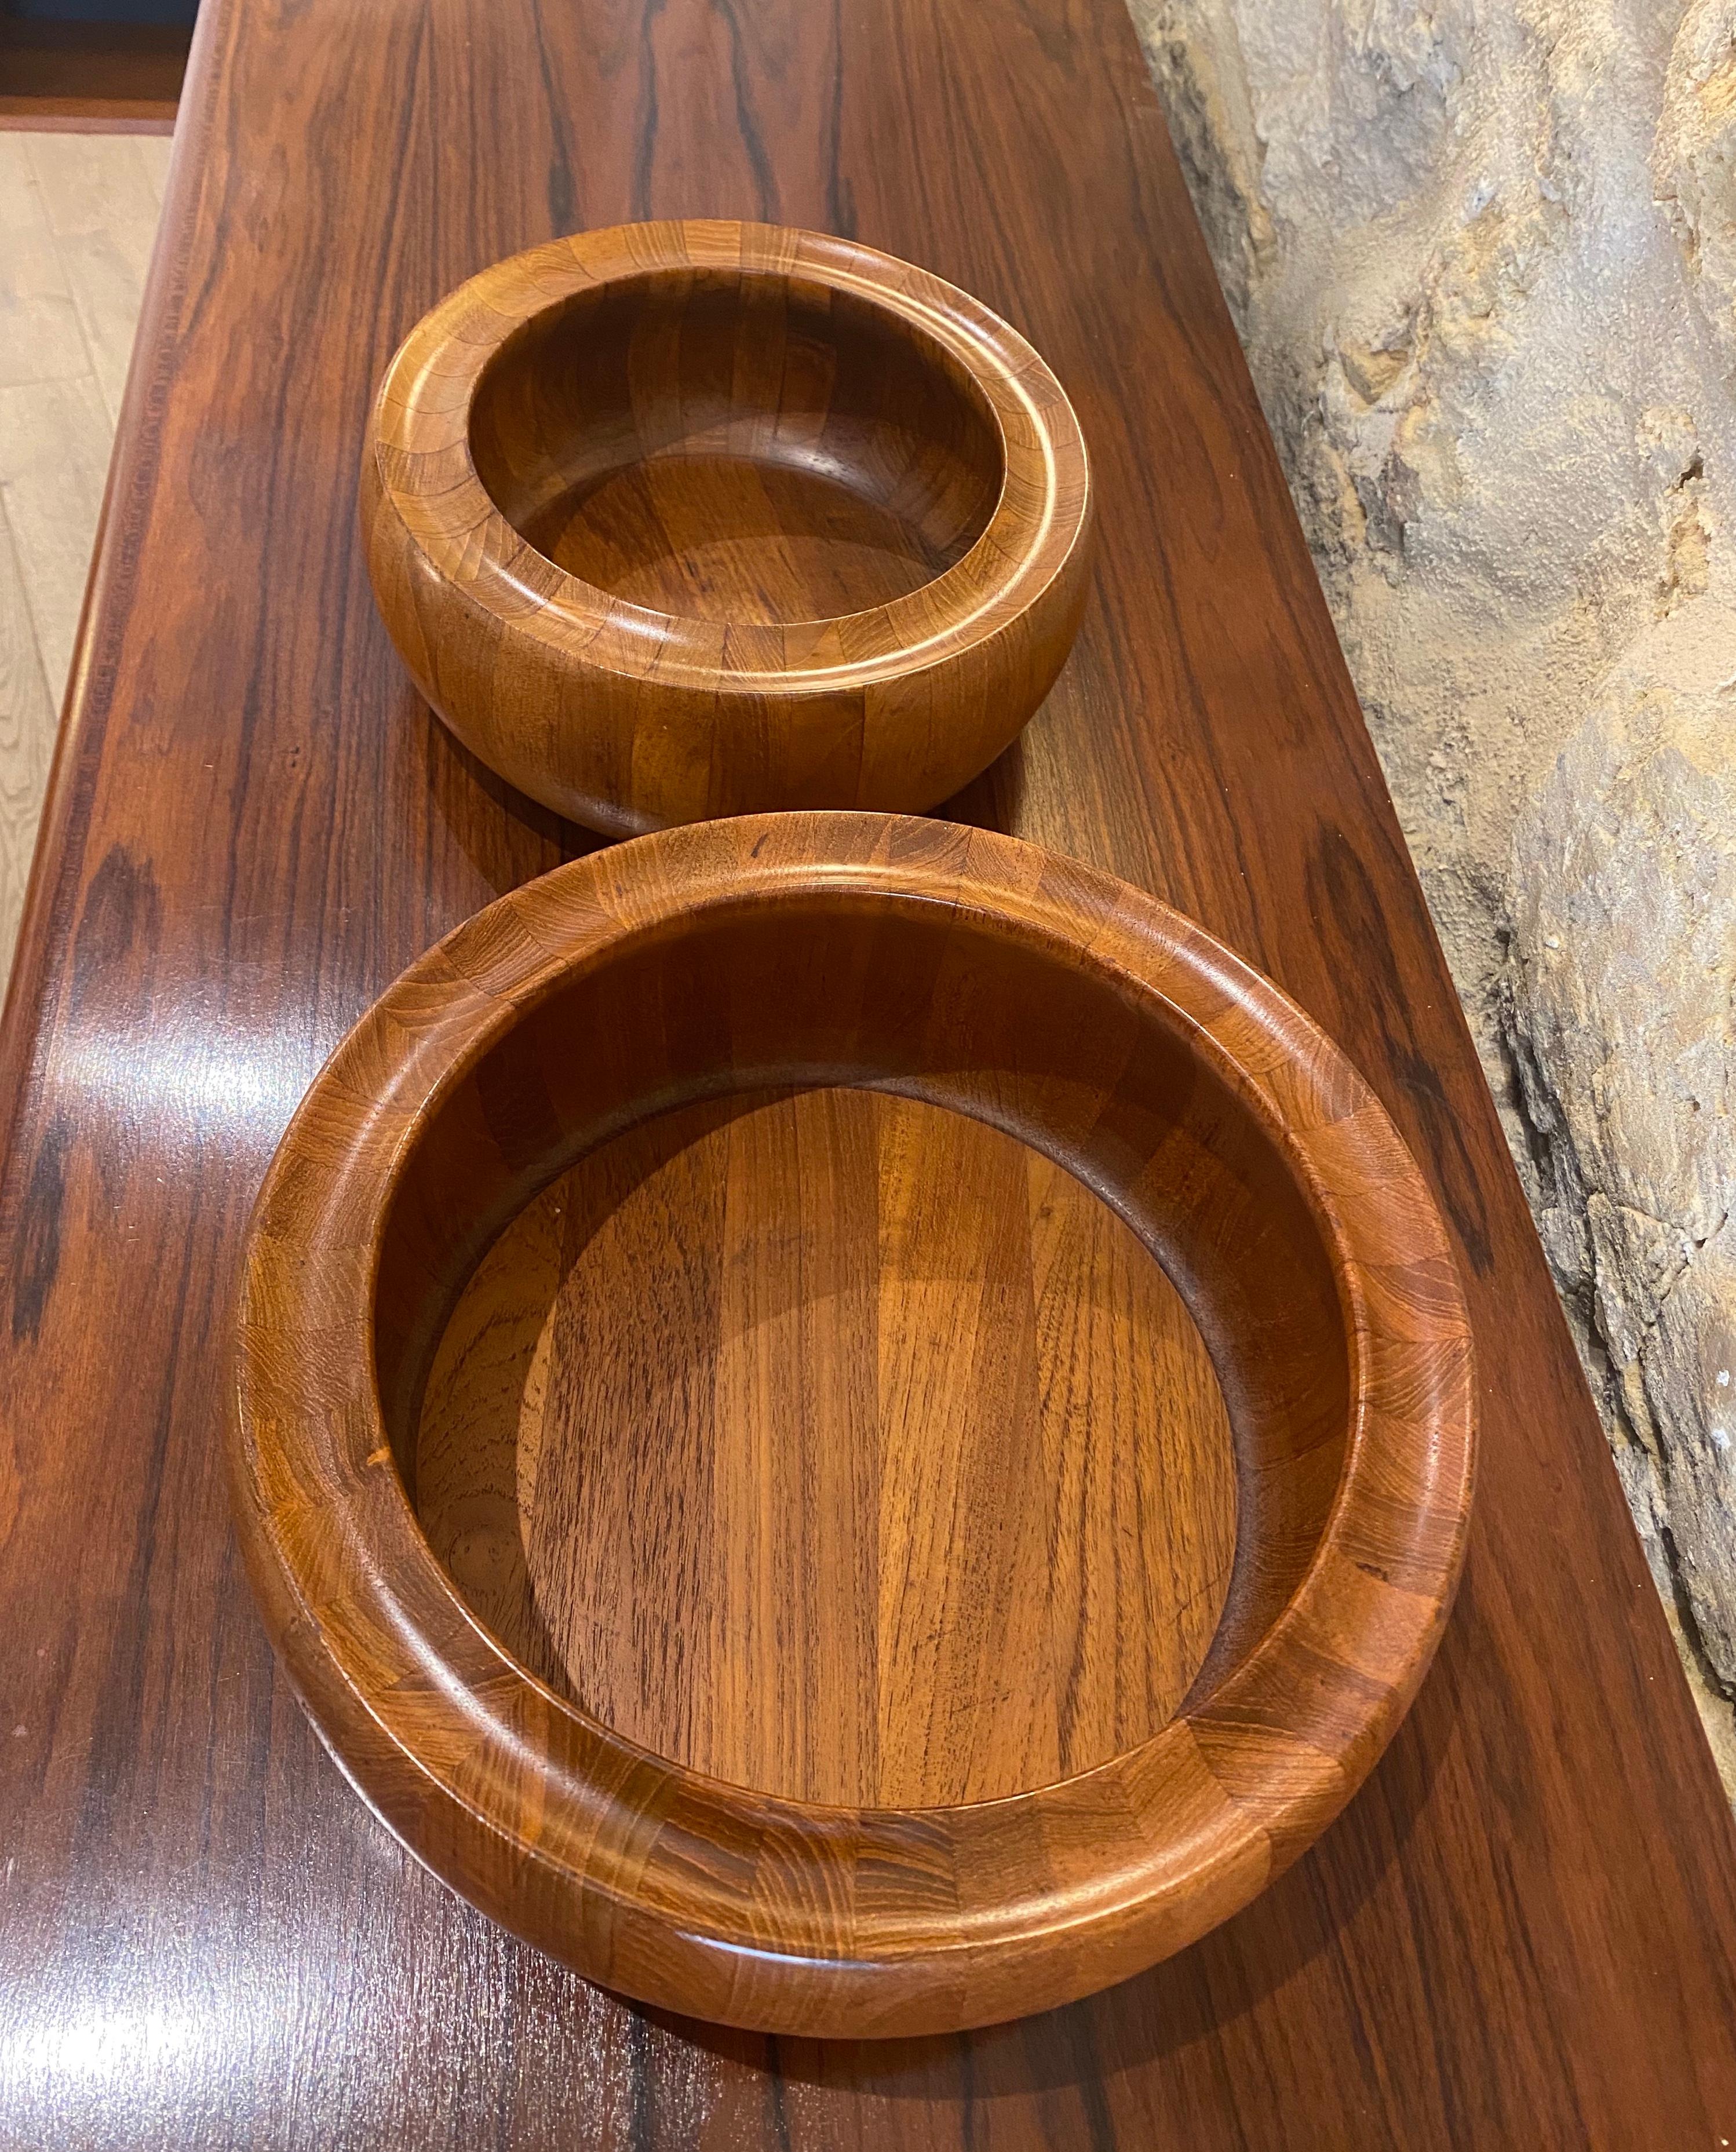 Fruit bowls in teak from the 1960s designed and produced by the danish tableware company Digsmed. Set of 2 bowls, one is 25X11cm and the other is 29x13cm.